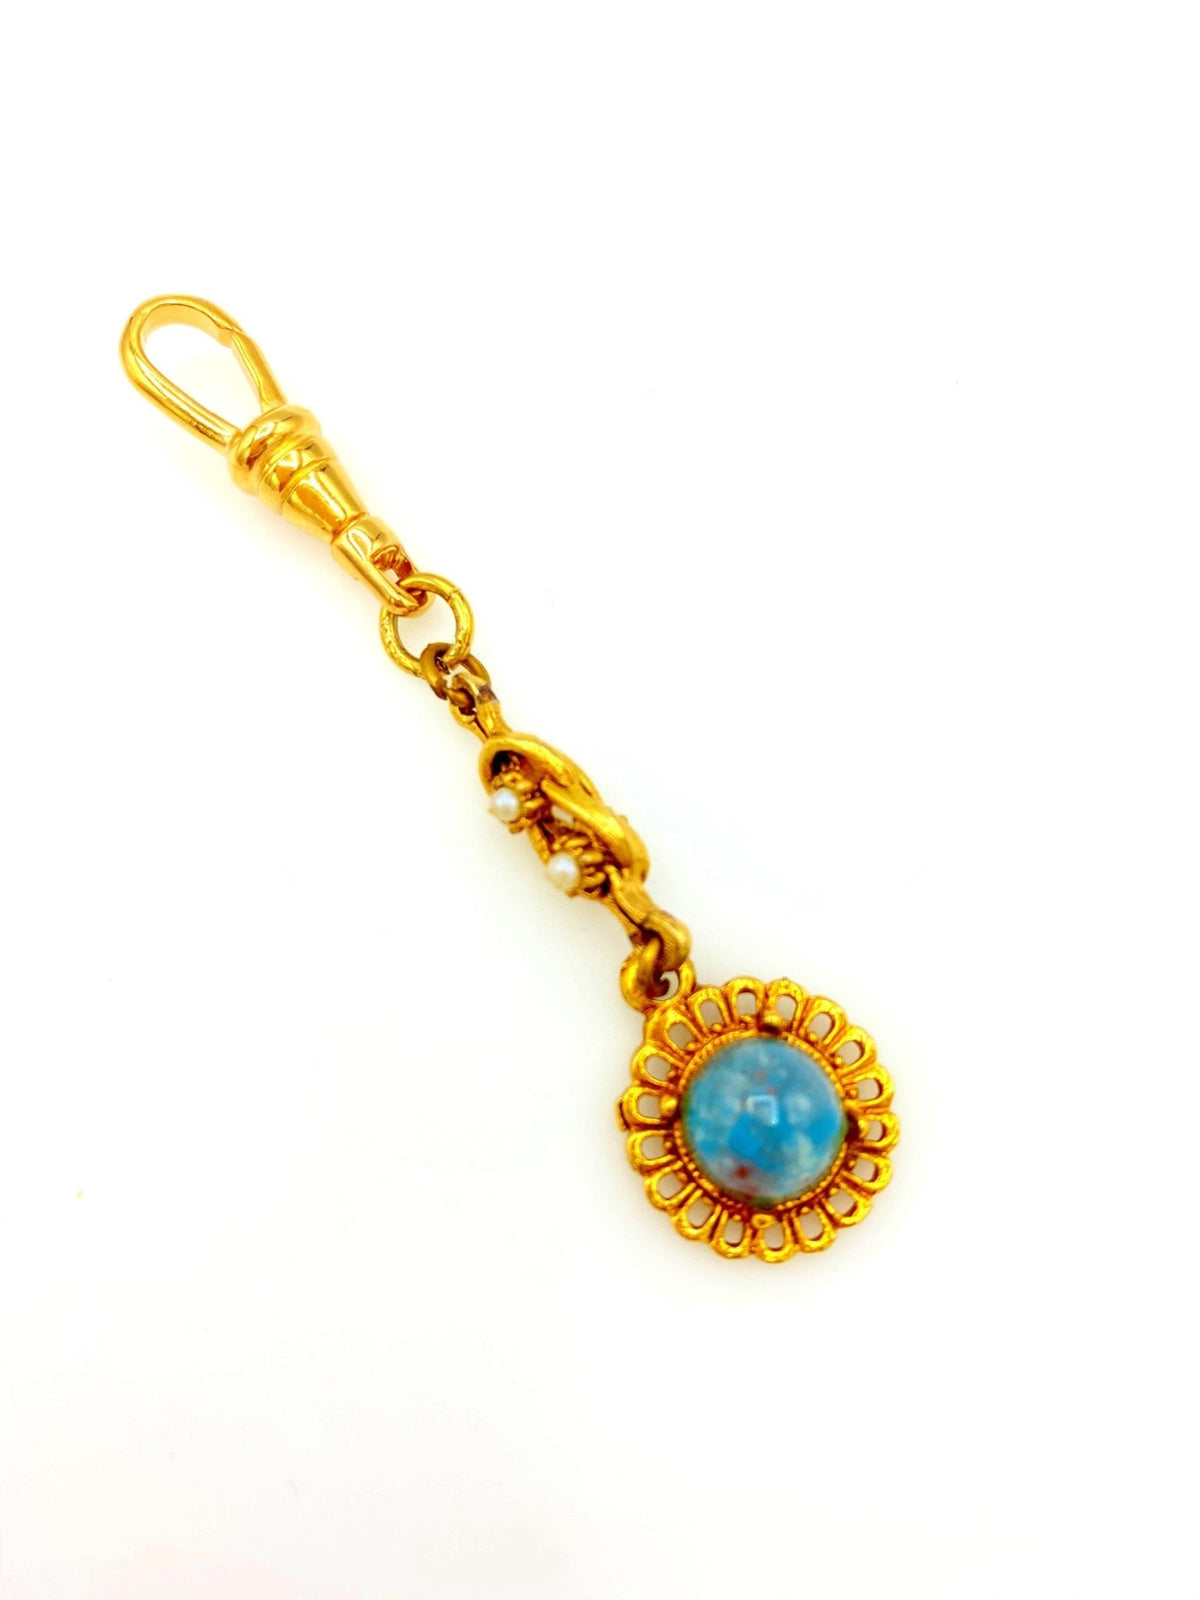 Gold Daisy Victorian Revival Charm - 24 Wishes Vintage Jewelry